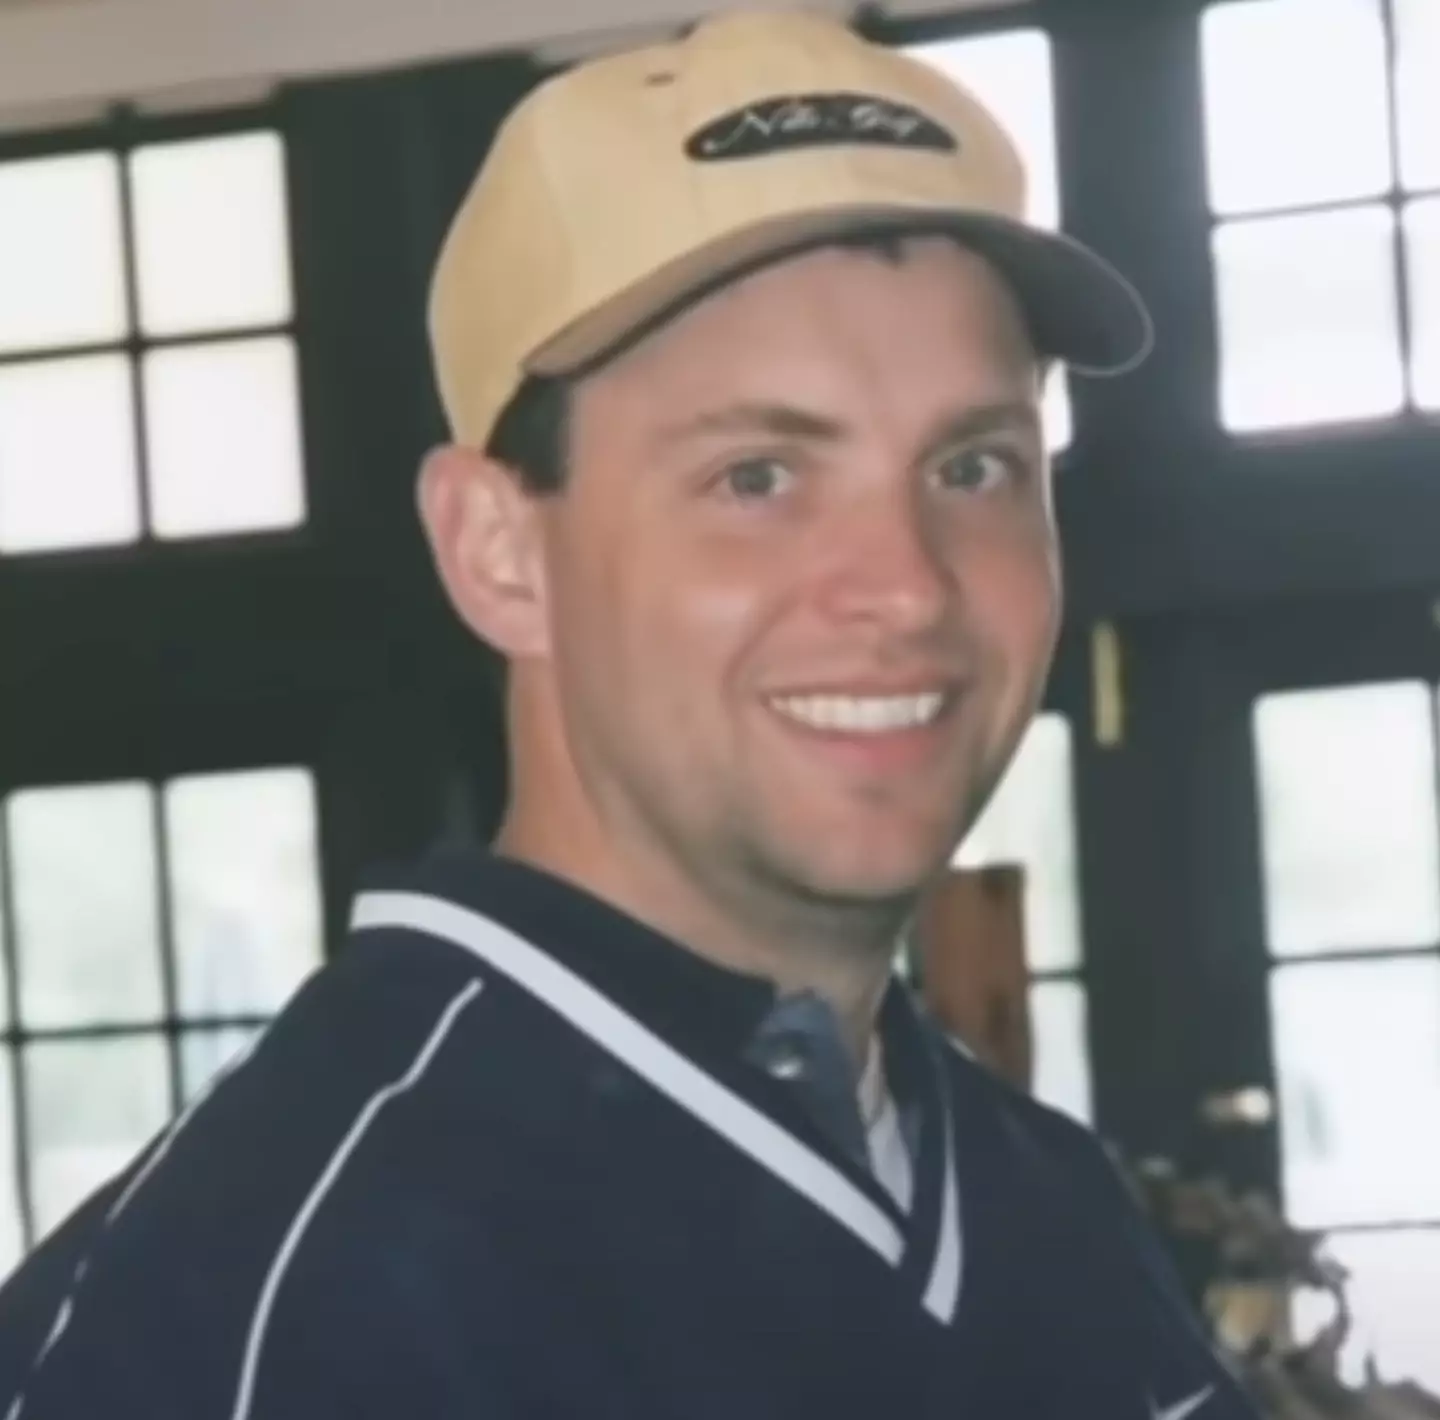 Todd Beamer tried his best to get help while onboard. (9/11 Memorial and Museum)